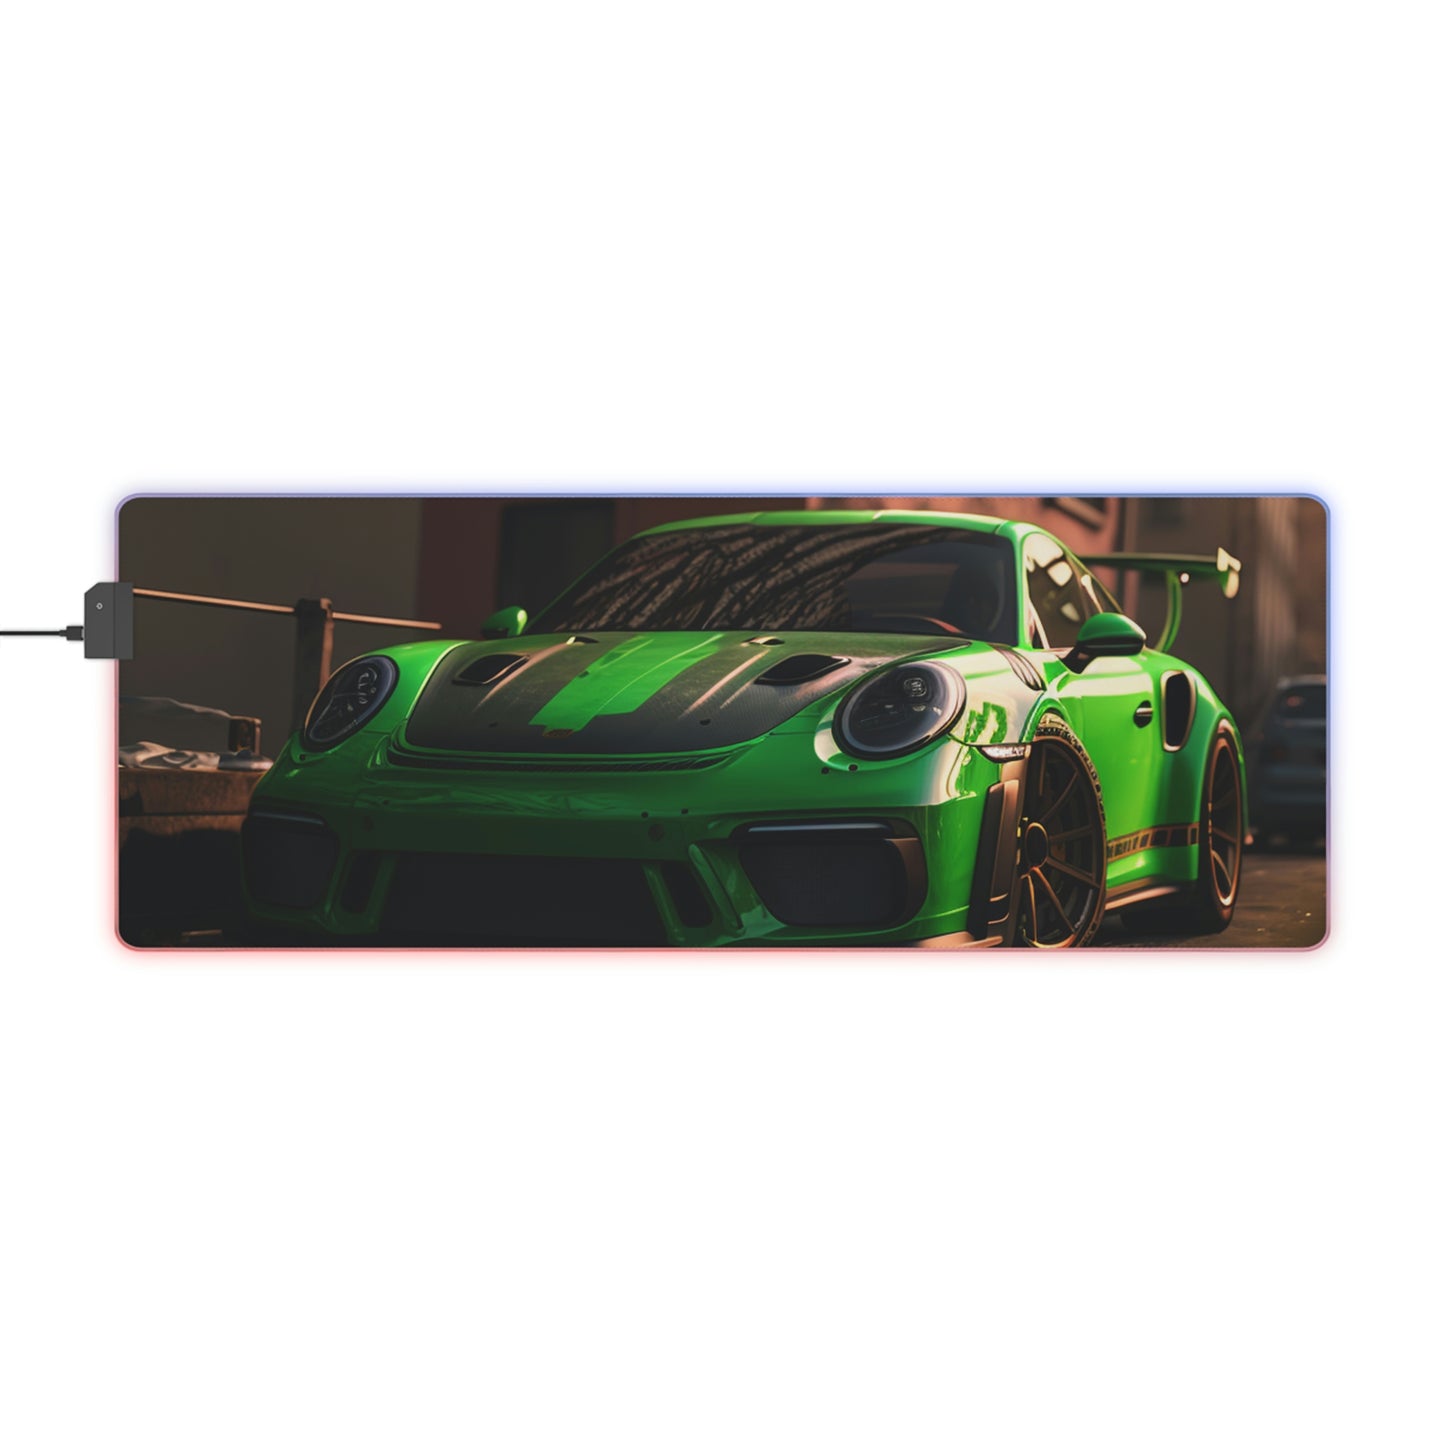 LED Gaming Mouse Pad Porsche GT3 4